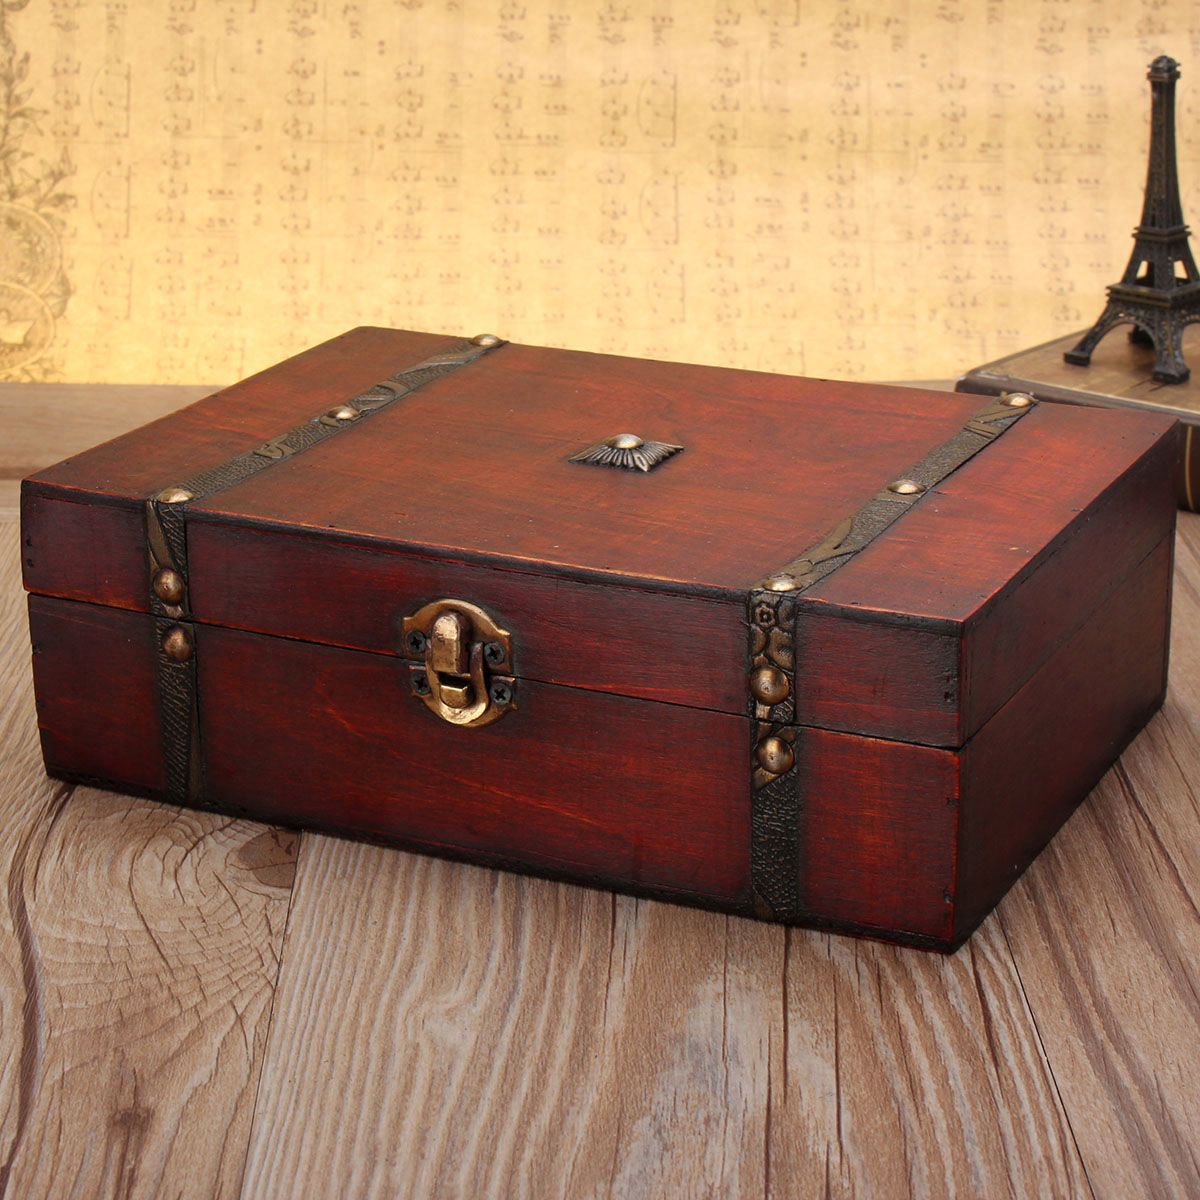 Large-Vintage-Wooden-Storage-Present-Candy-Gift-Box-Wedding-Party-Jewelry-Gift-Big-Box-1035341